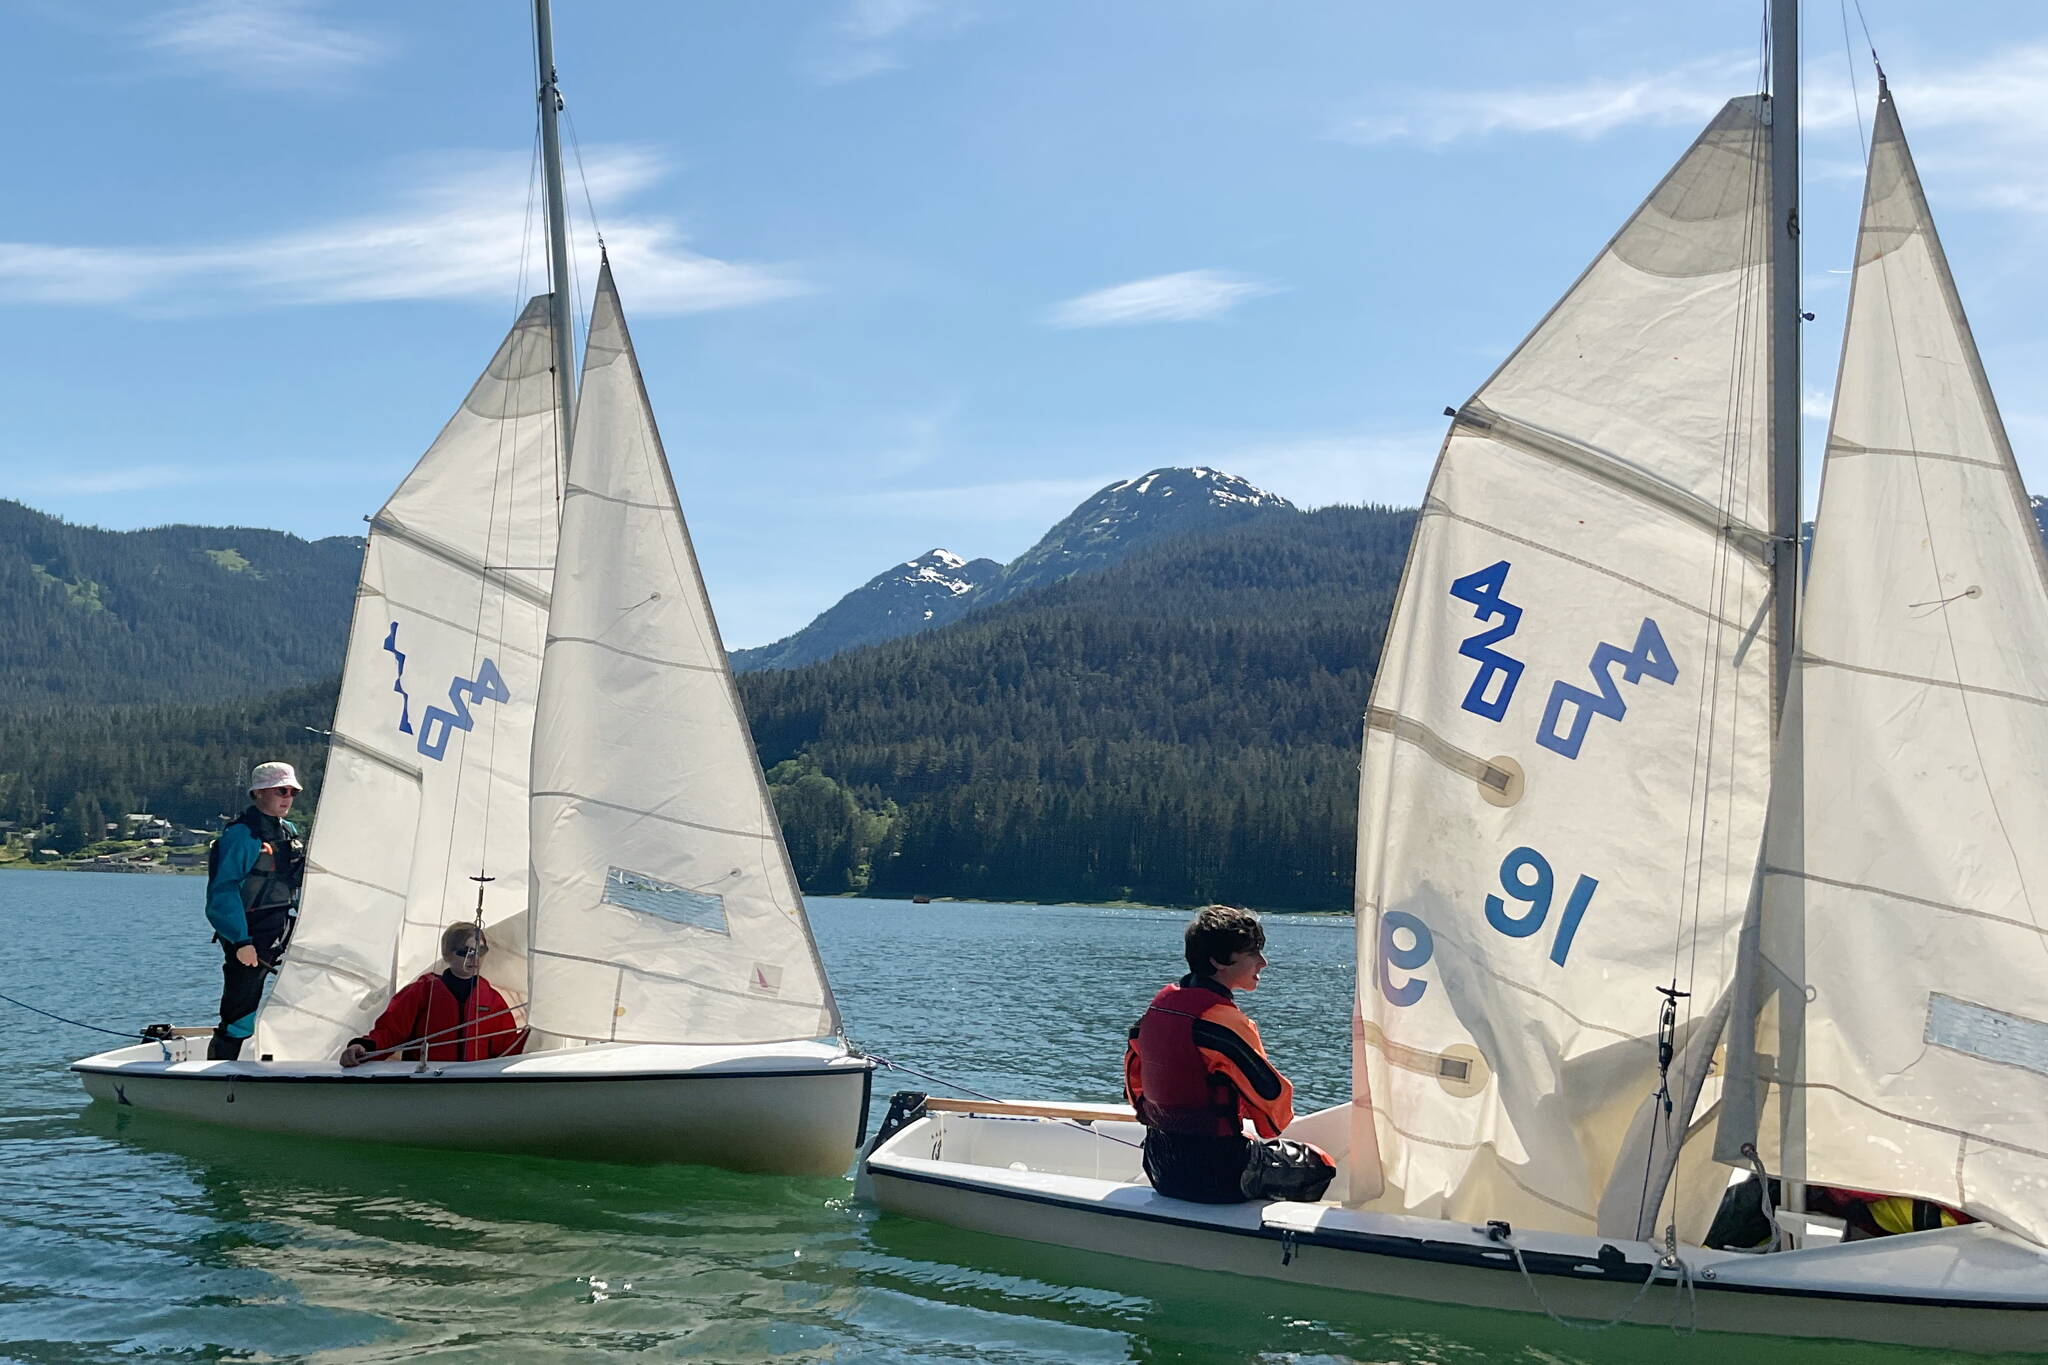 Brendan West, 17, left, and Jack Adams, 15, guide one sailboat while Wesley Torgerson, 16, helps guide another to the dock during a Juneau Youth Sailing course this week. (Therese Pokorney / Juneau Empire)